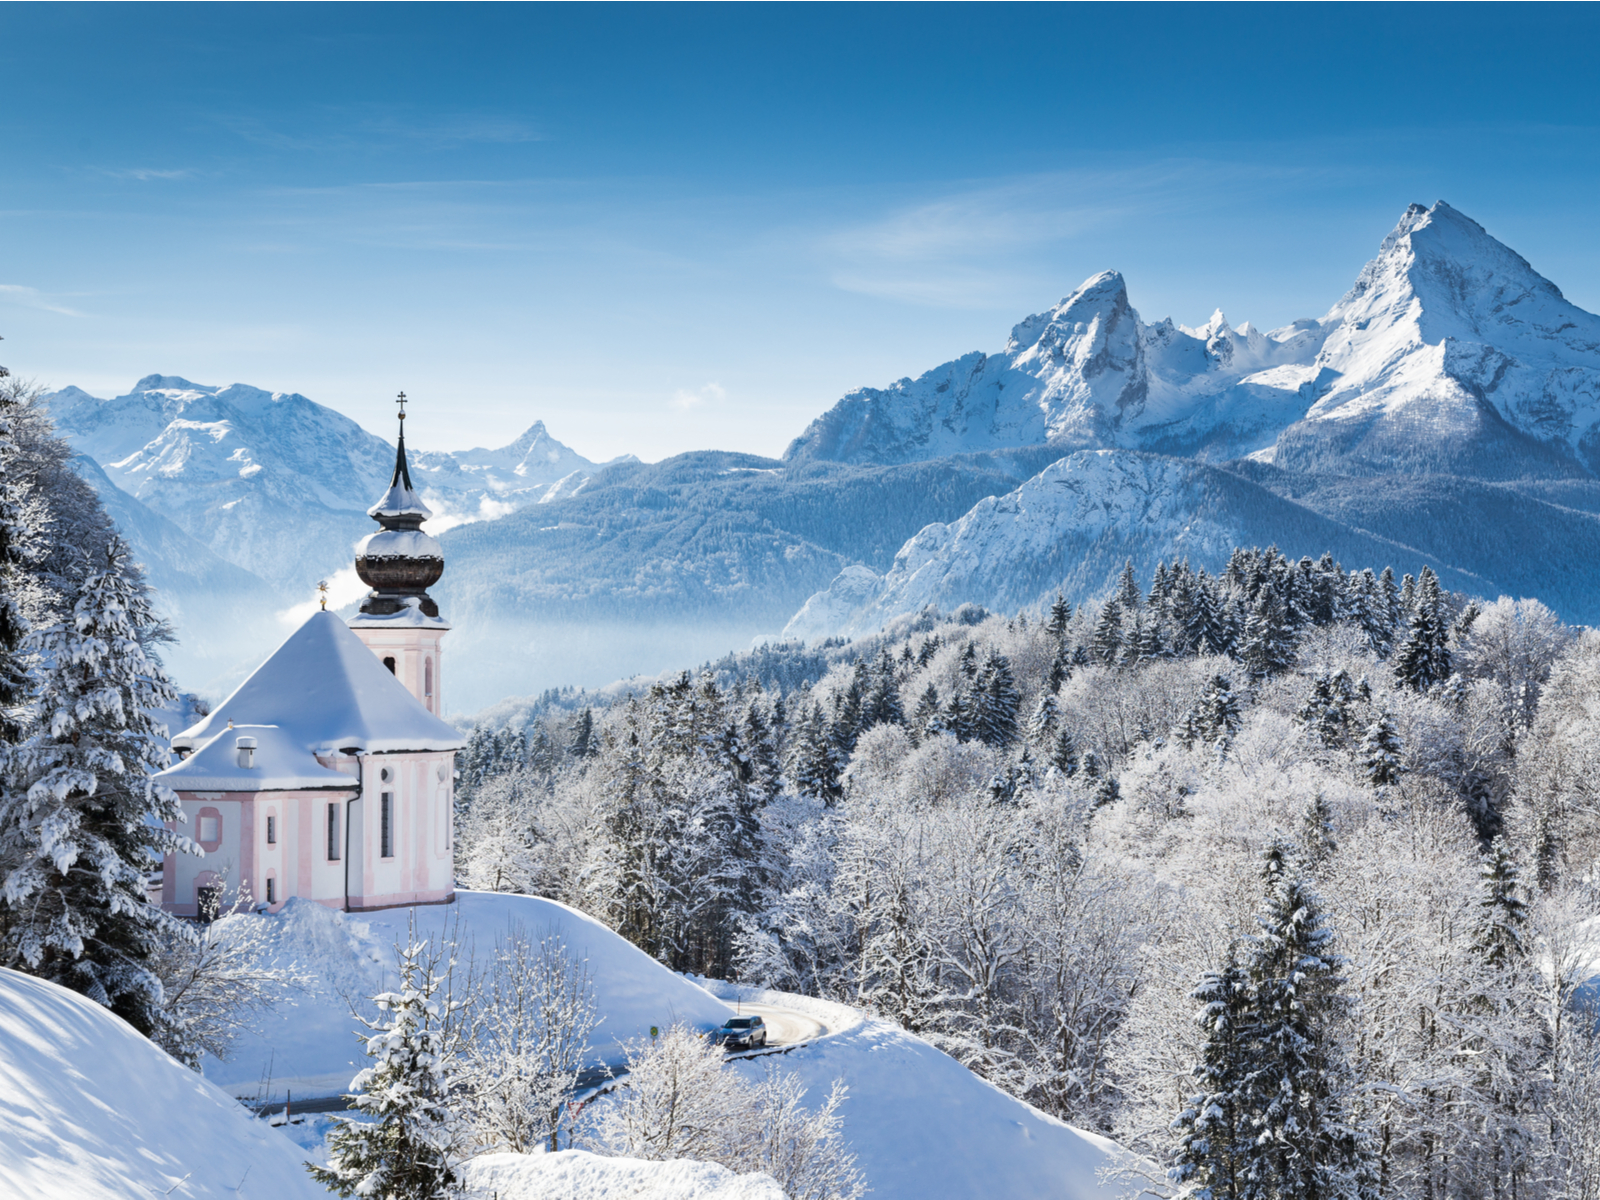 Panoramic view of the Alps overlooking the mountains with a church in the foreground during the worst time to visit Germany, in Winter